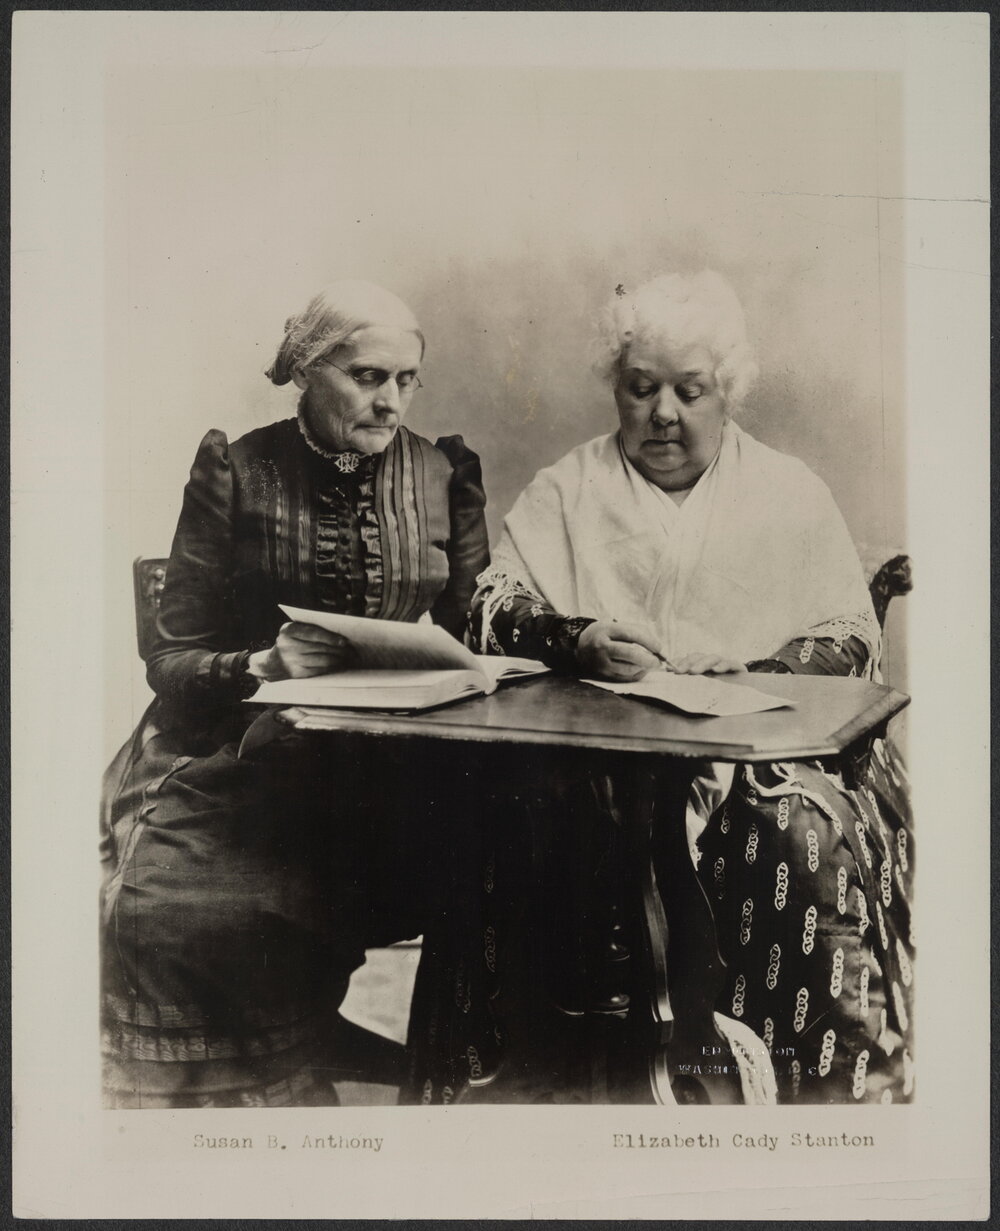 Susan B. Anthony (left) and Elizabeth Cady Stanton (right)